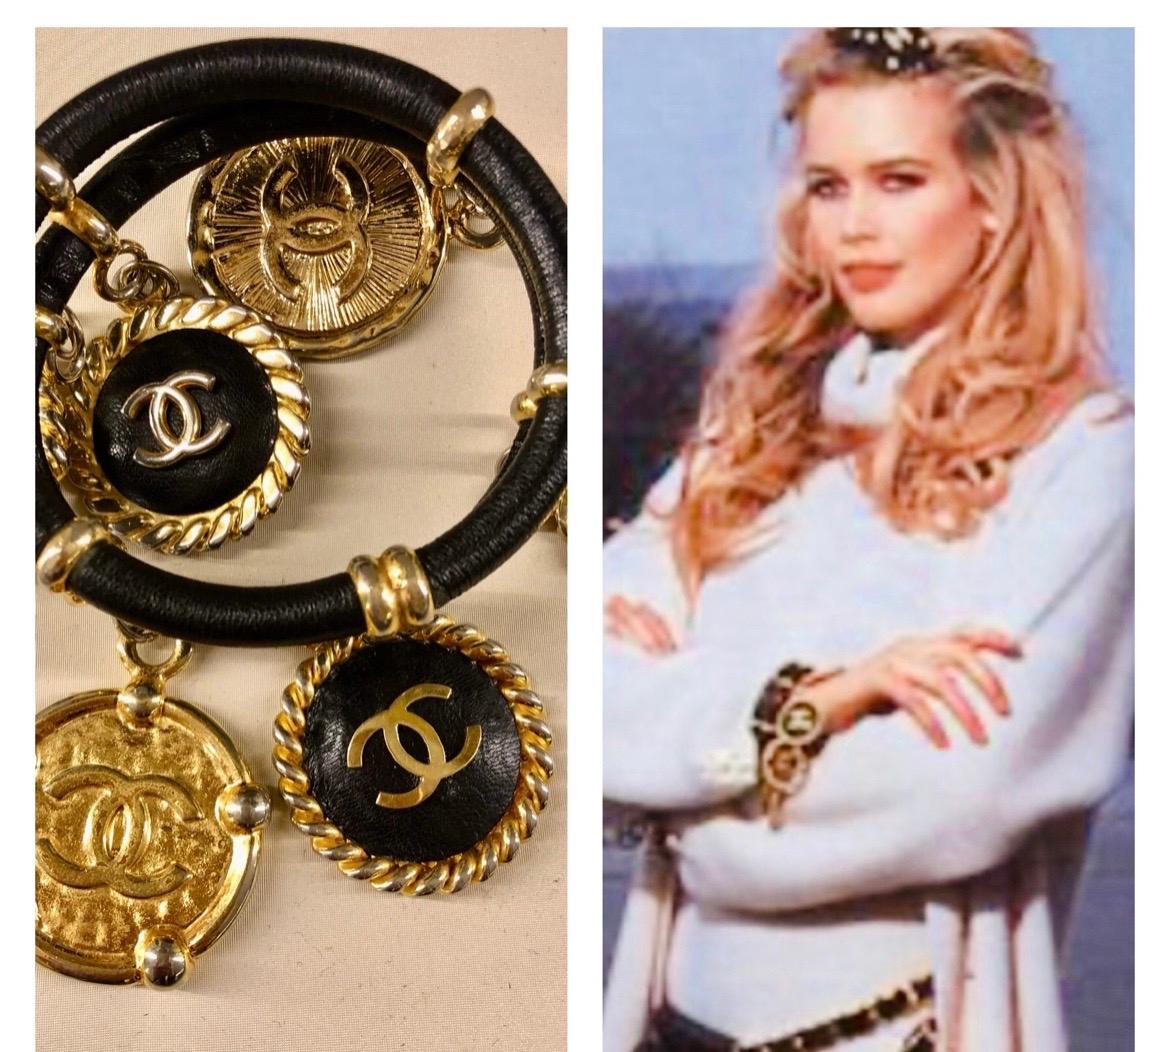 Bracelet with CC charm in black vintage Chanel leather. Worn by Claudia Schiffer.
CC Charm bracelet in black Chanel Paris Runway leather from the 90s in excellent condition. Collector's item! Approximate measurements: internal length 7.5